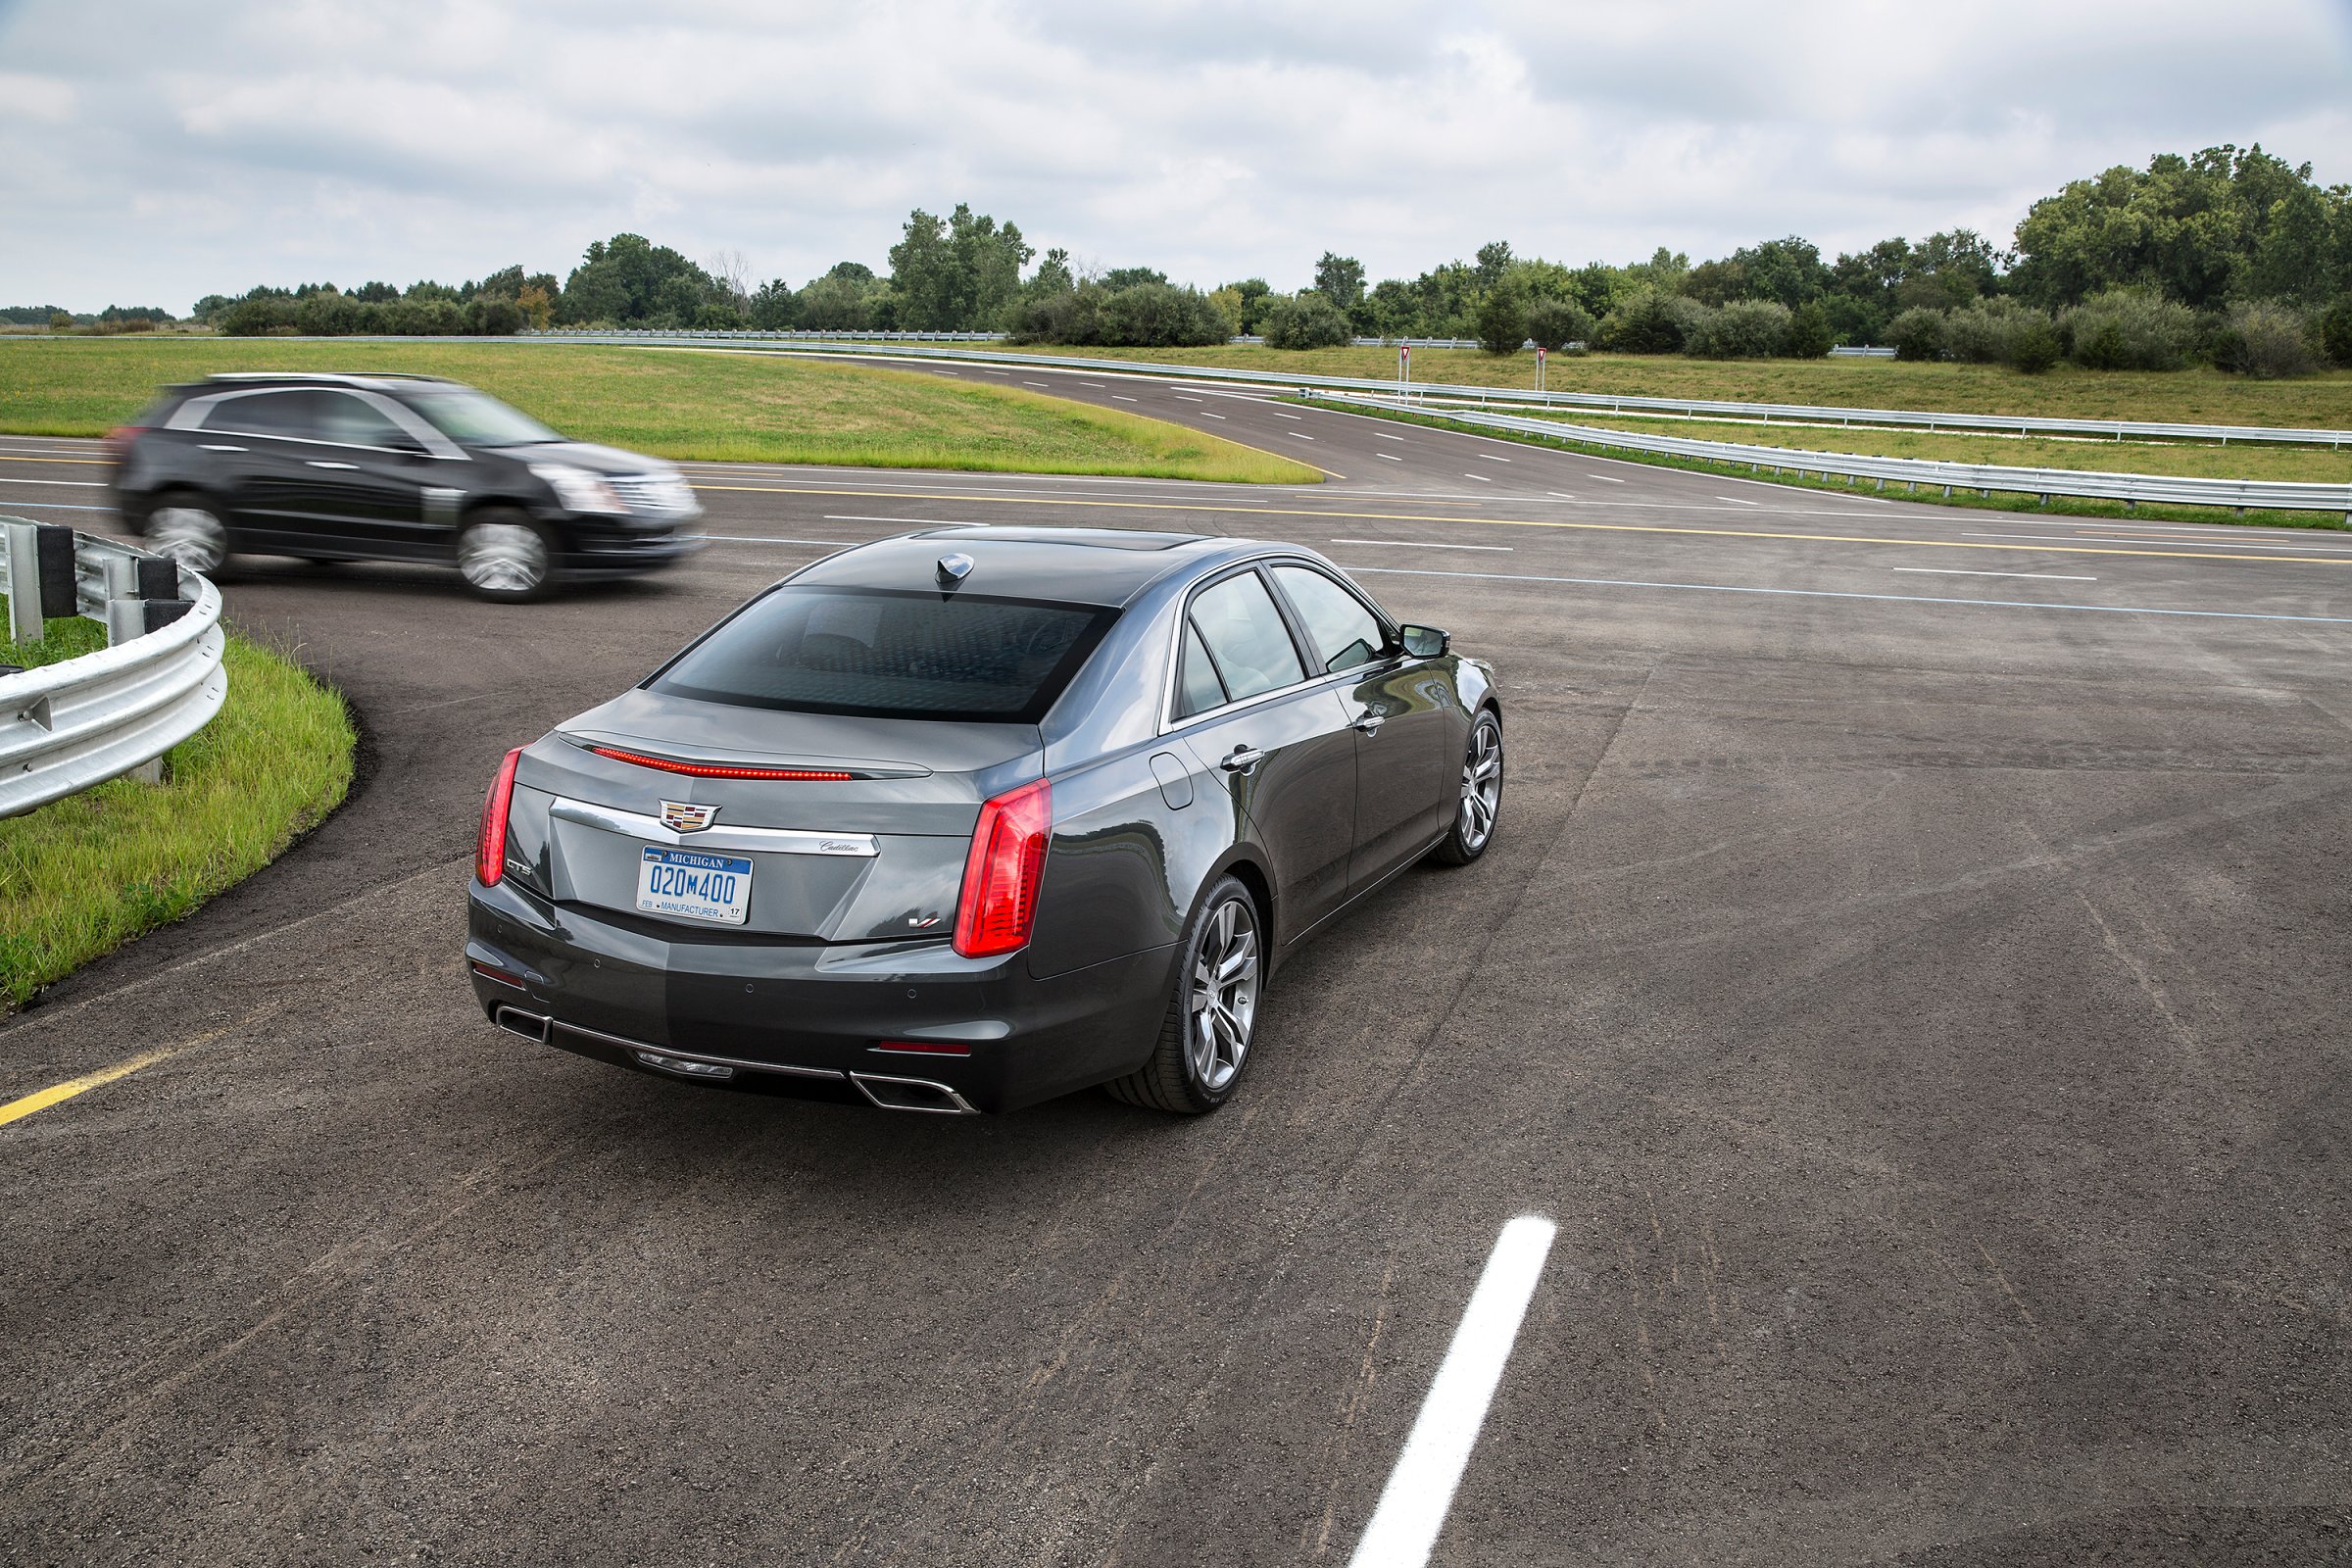 A 2015 Cadillac CTS, equipped with V2V technology, notifies the driver of the approaching Cadillac SRX from the left before the driver could see the vehicle.